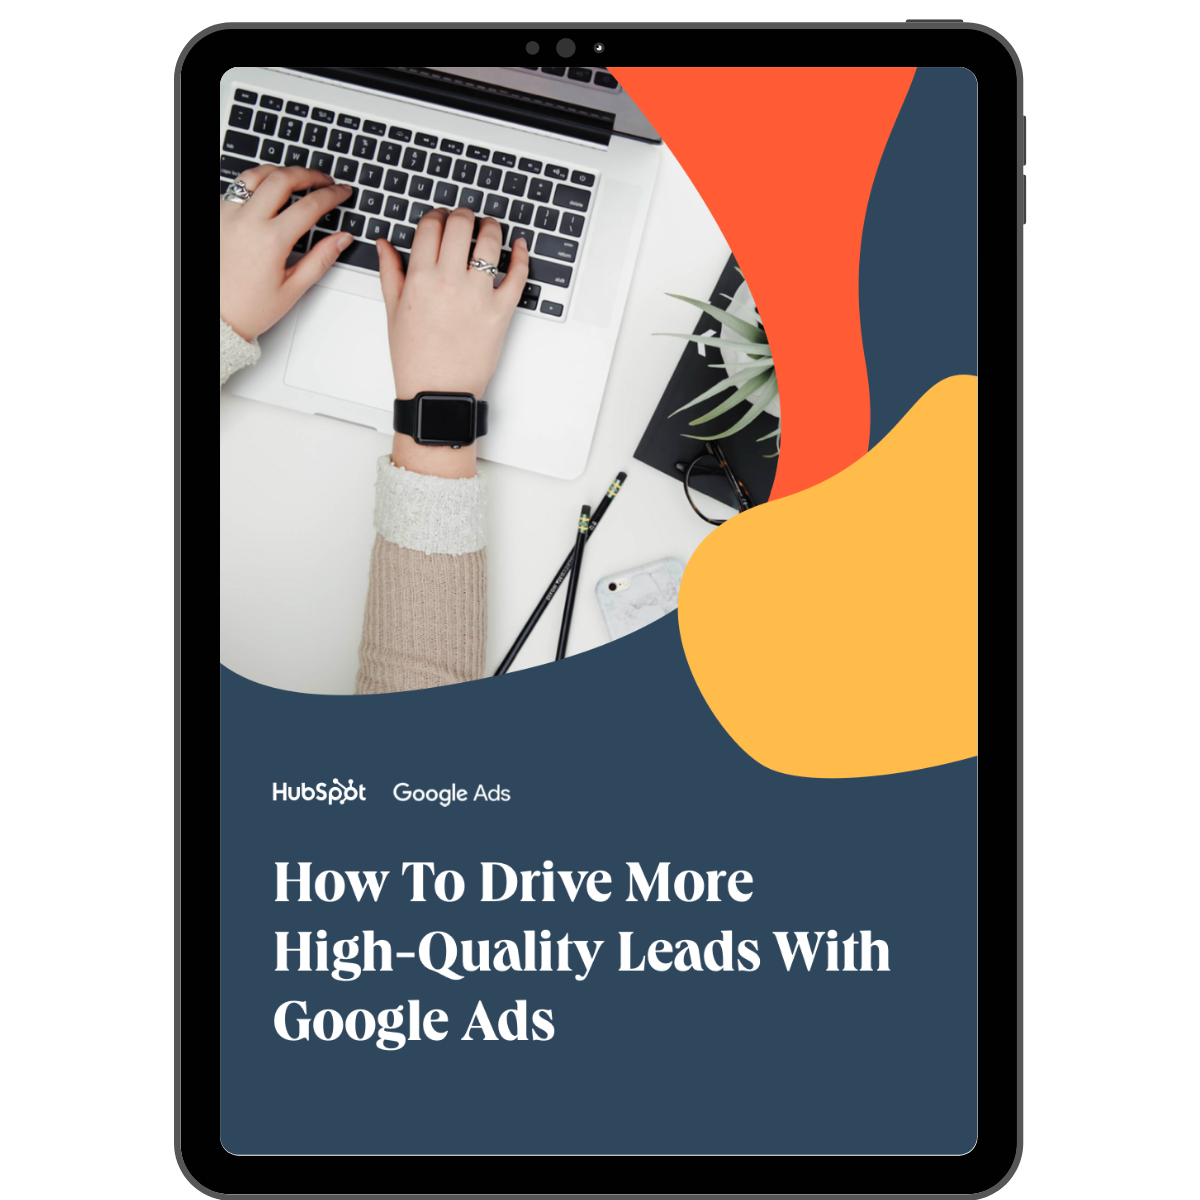 How to drive more high-quality leads with google ads (1)